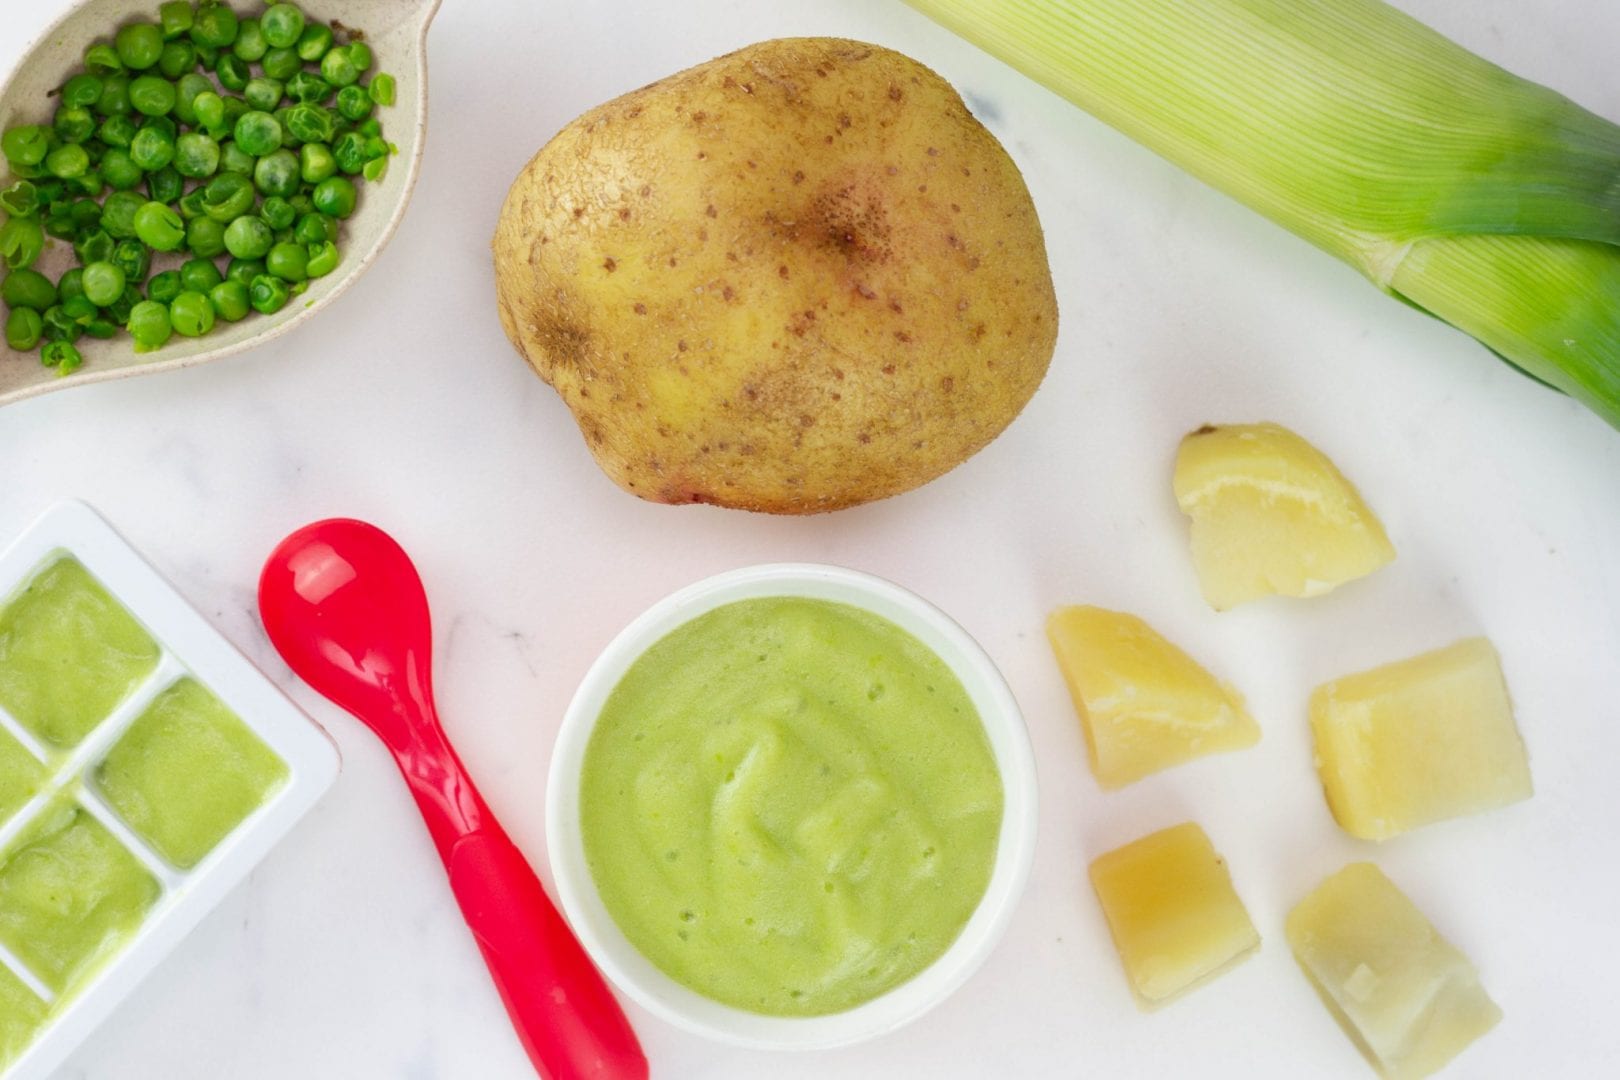 Pea puree for babies - great first foods recipe 